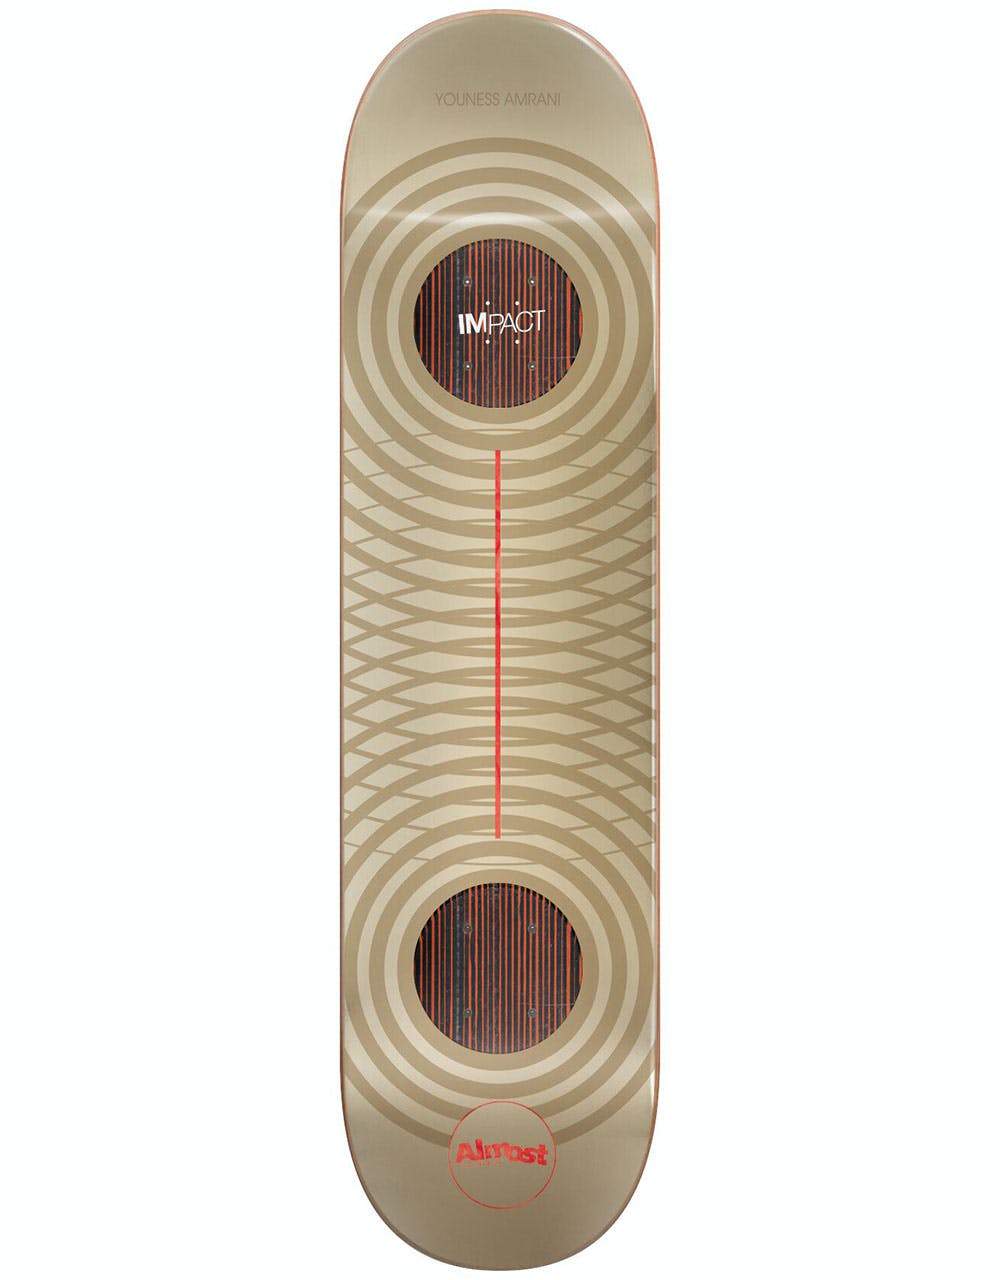 Almost Youness Metallic Rings Impact Support Skateboard Deck - 8.25"